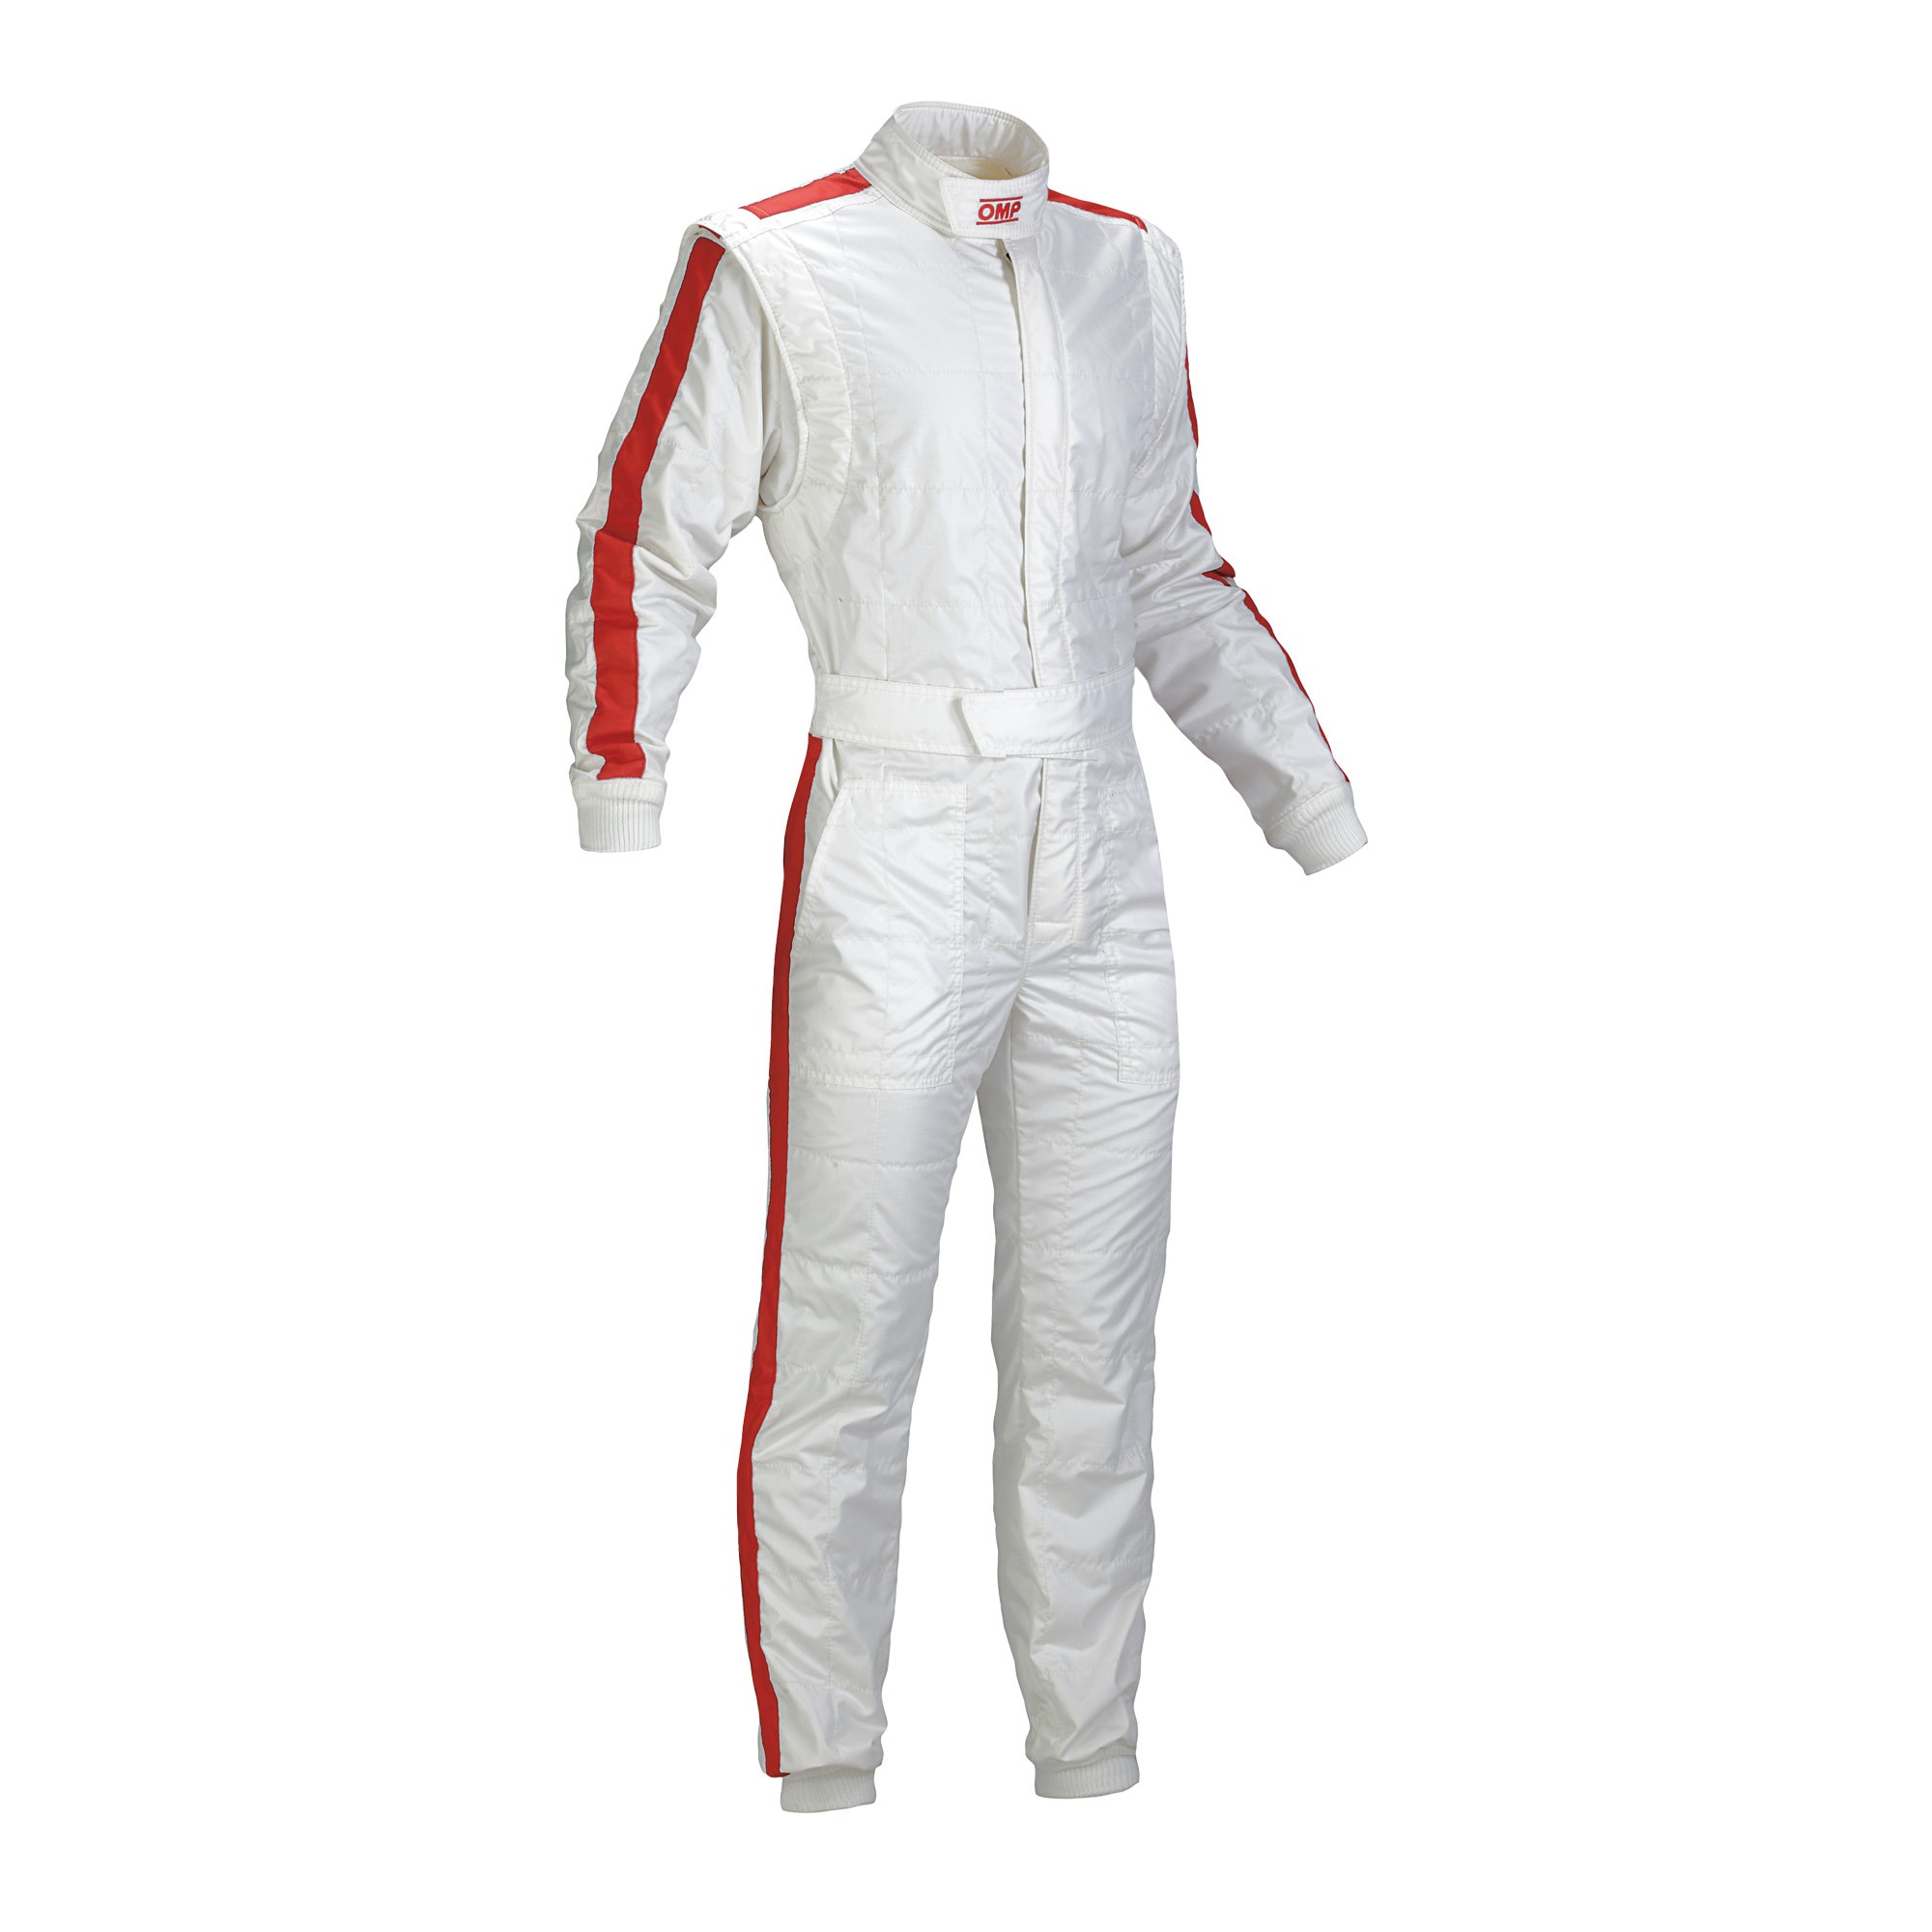 ONE VINTAGE OVERALL my2021 WHITE SIZE 46 FIA 8856-2018